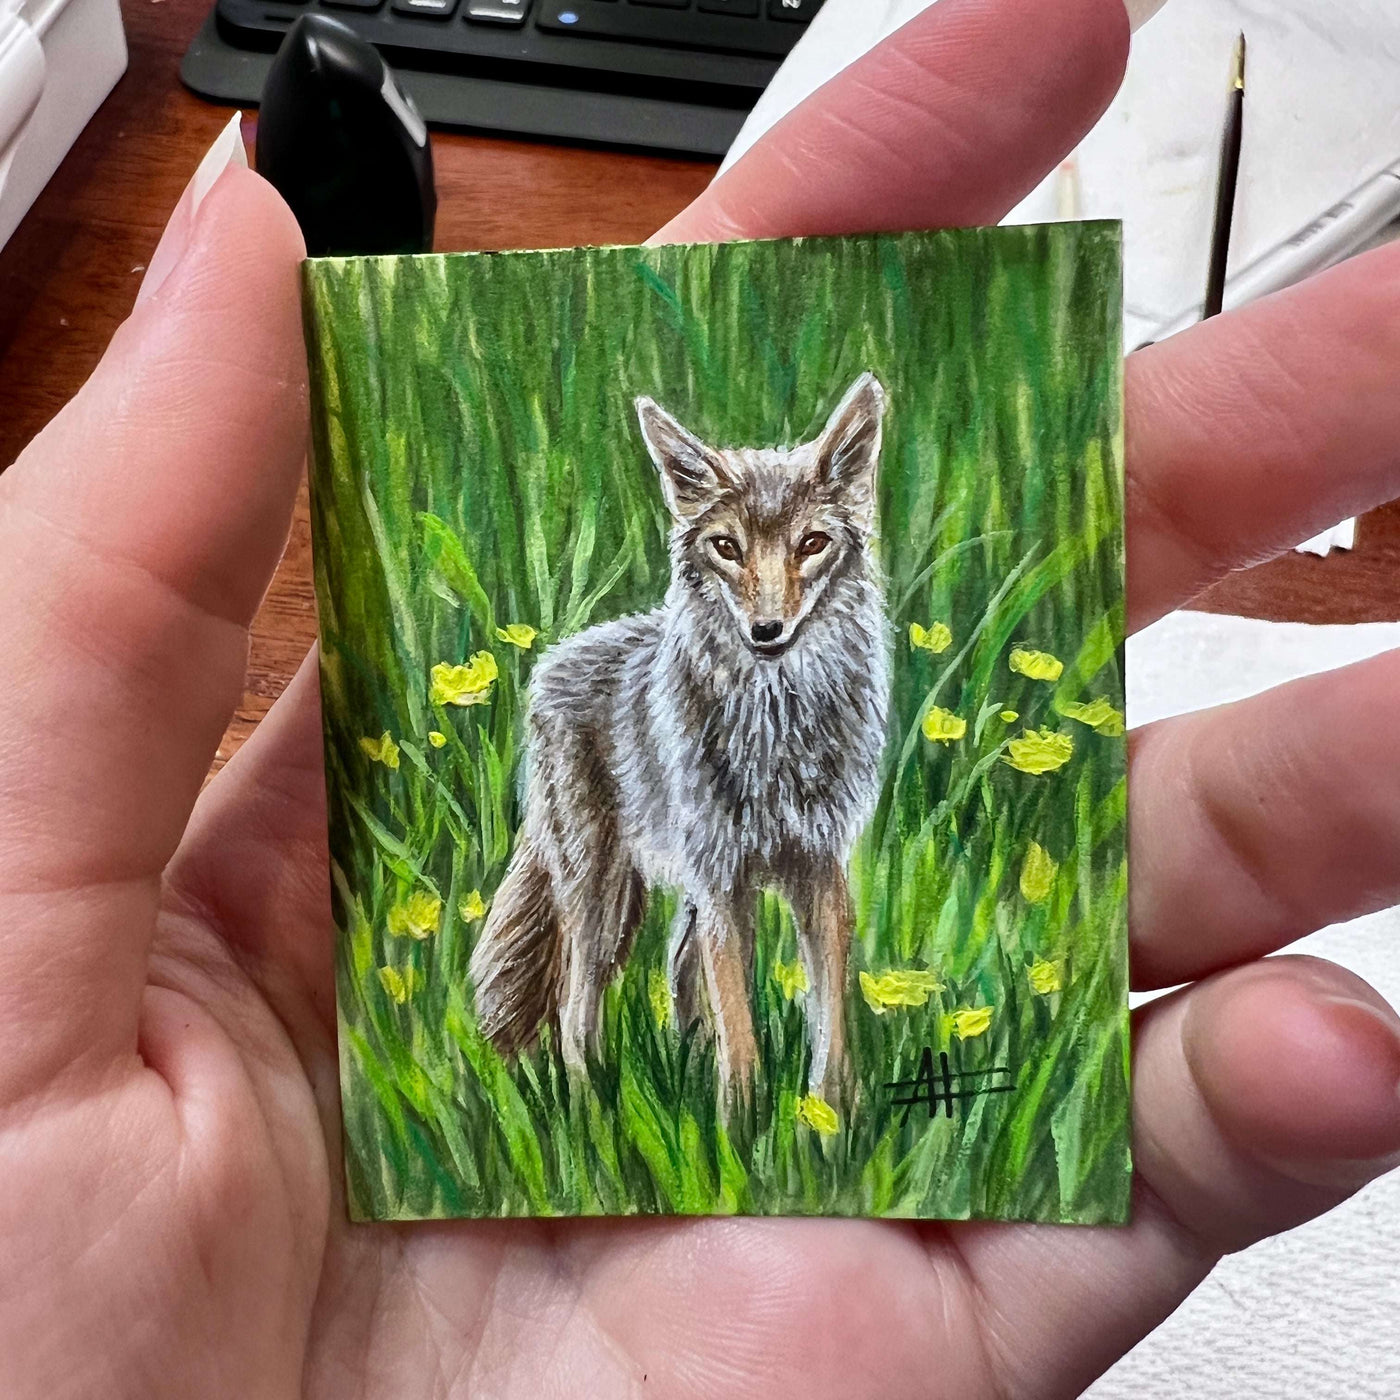 A hand holding a small painting of a coyote amidst yellow flowers with art supplies in the background.